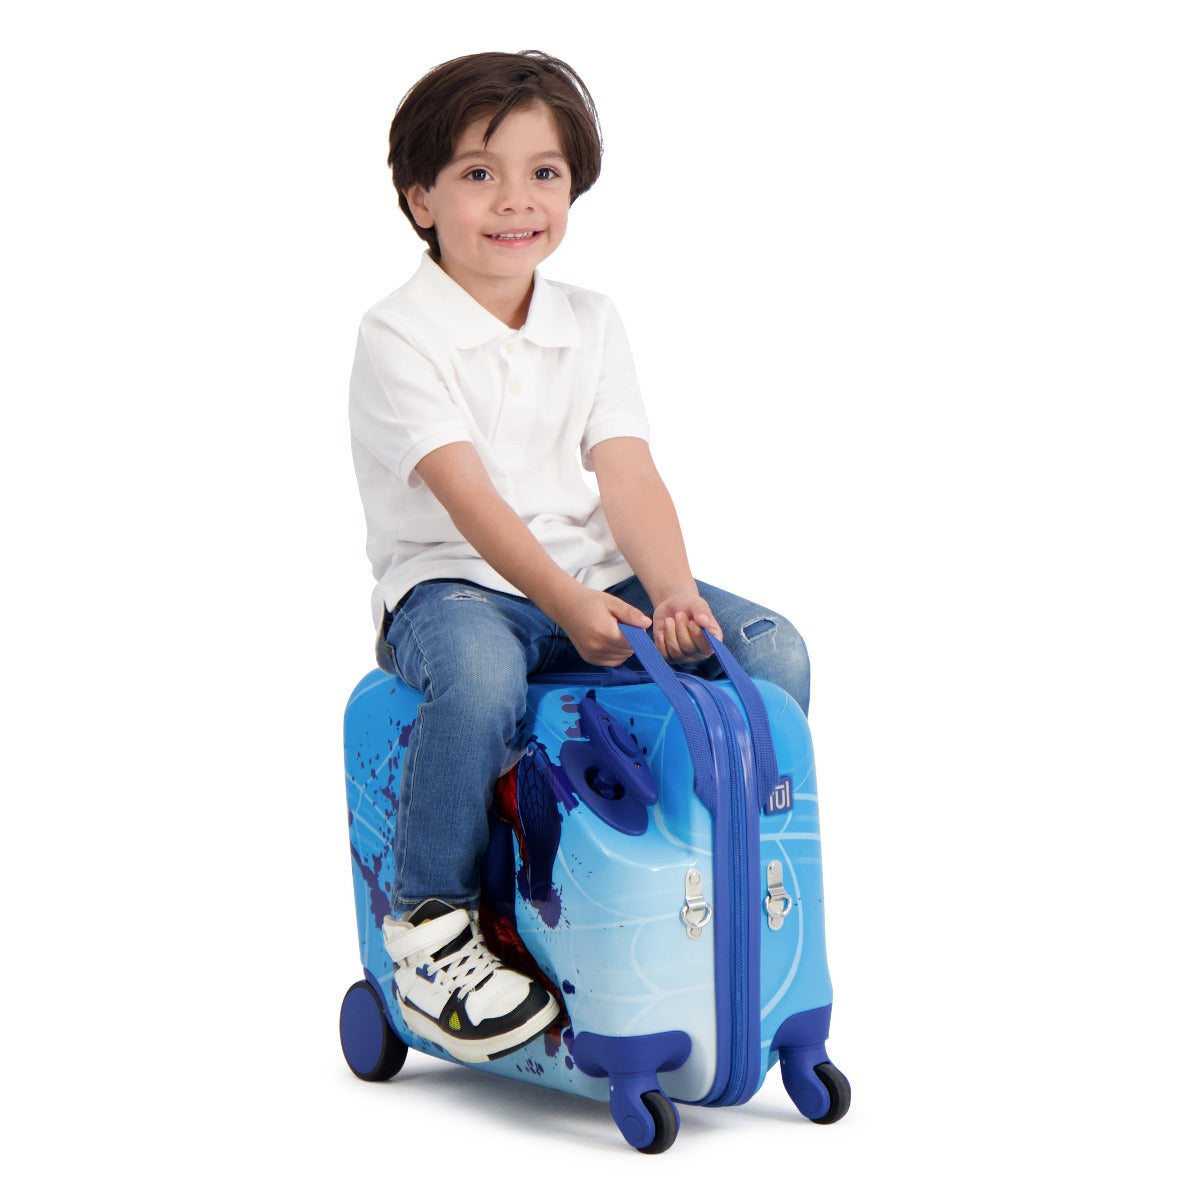 Ful Marvel Spiderman 14.5 inch kids ride-on rolling luggage for traveling